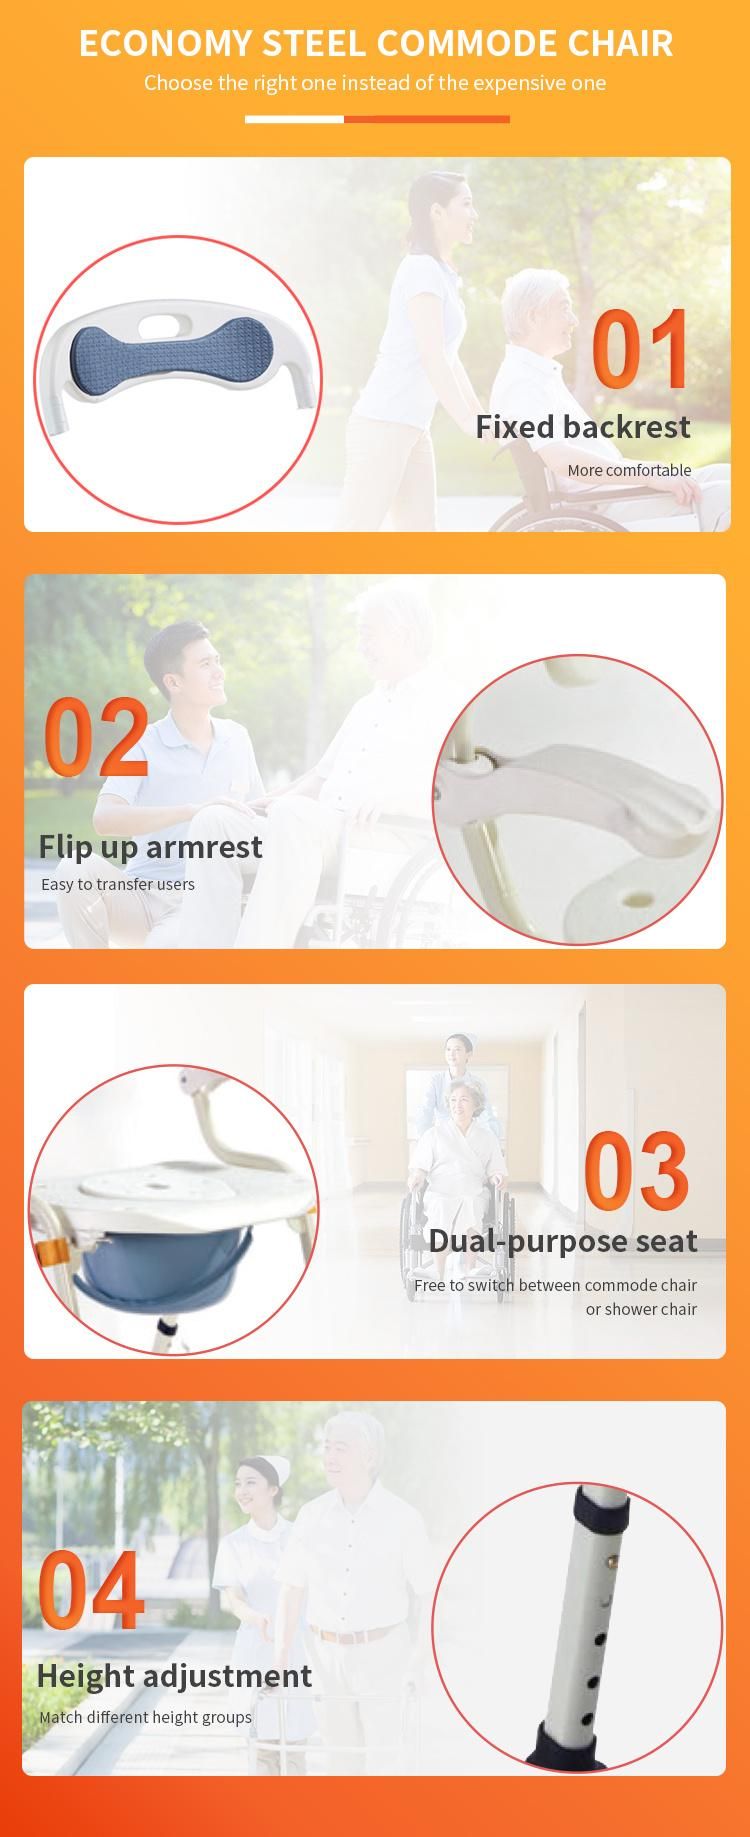 Health Care Cheap Price Basic Simple Standard Commode Chair Manual Plastic 3in 1chair with Commode Can Use Toilet Seat Raiser Toilet Seat Frame